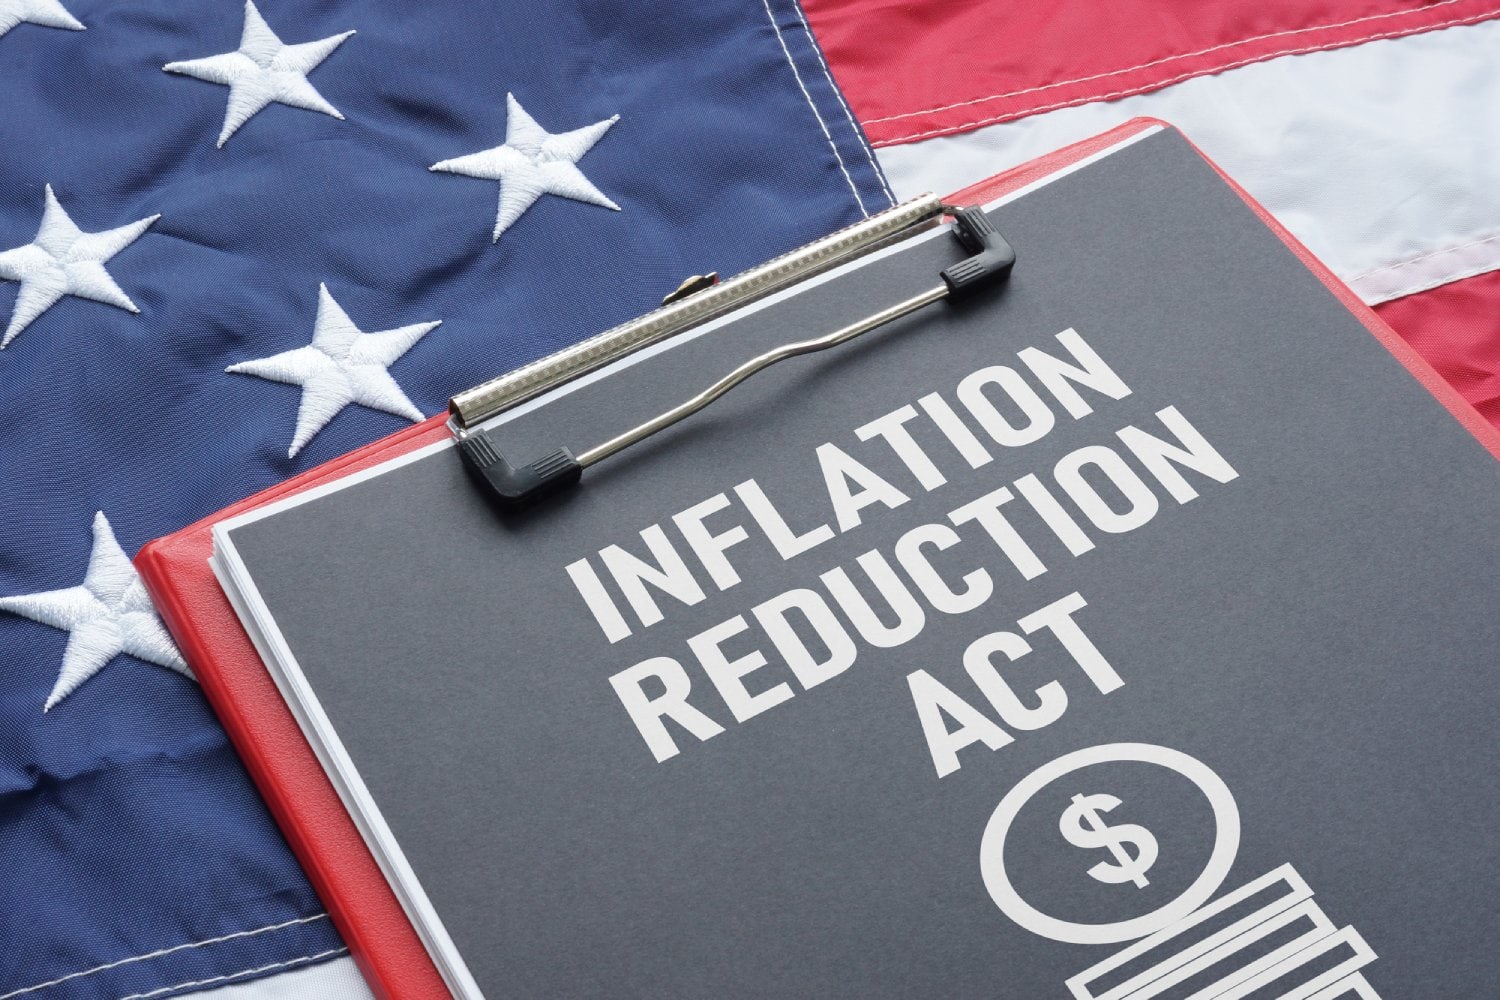 inflation-reduction-act-health-insurance-broker-raleigh